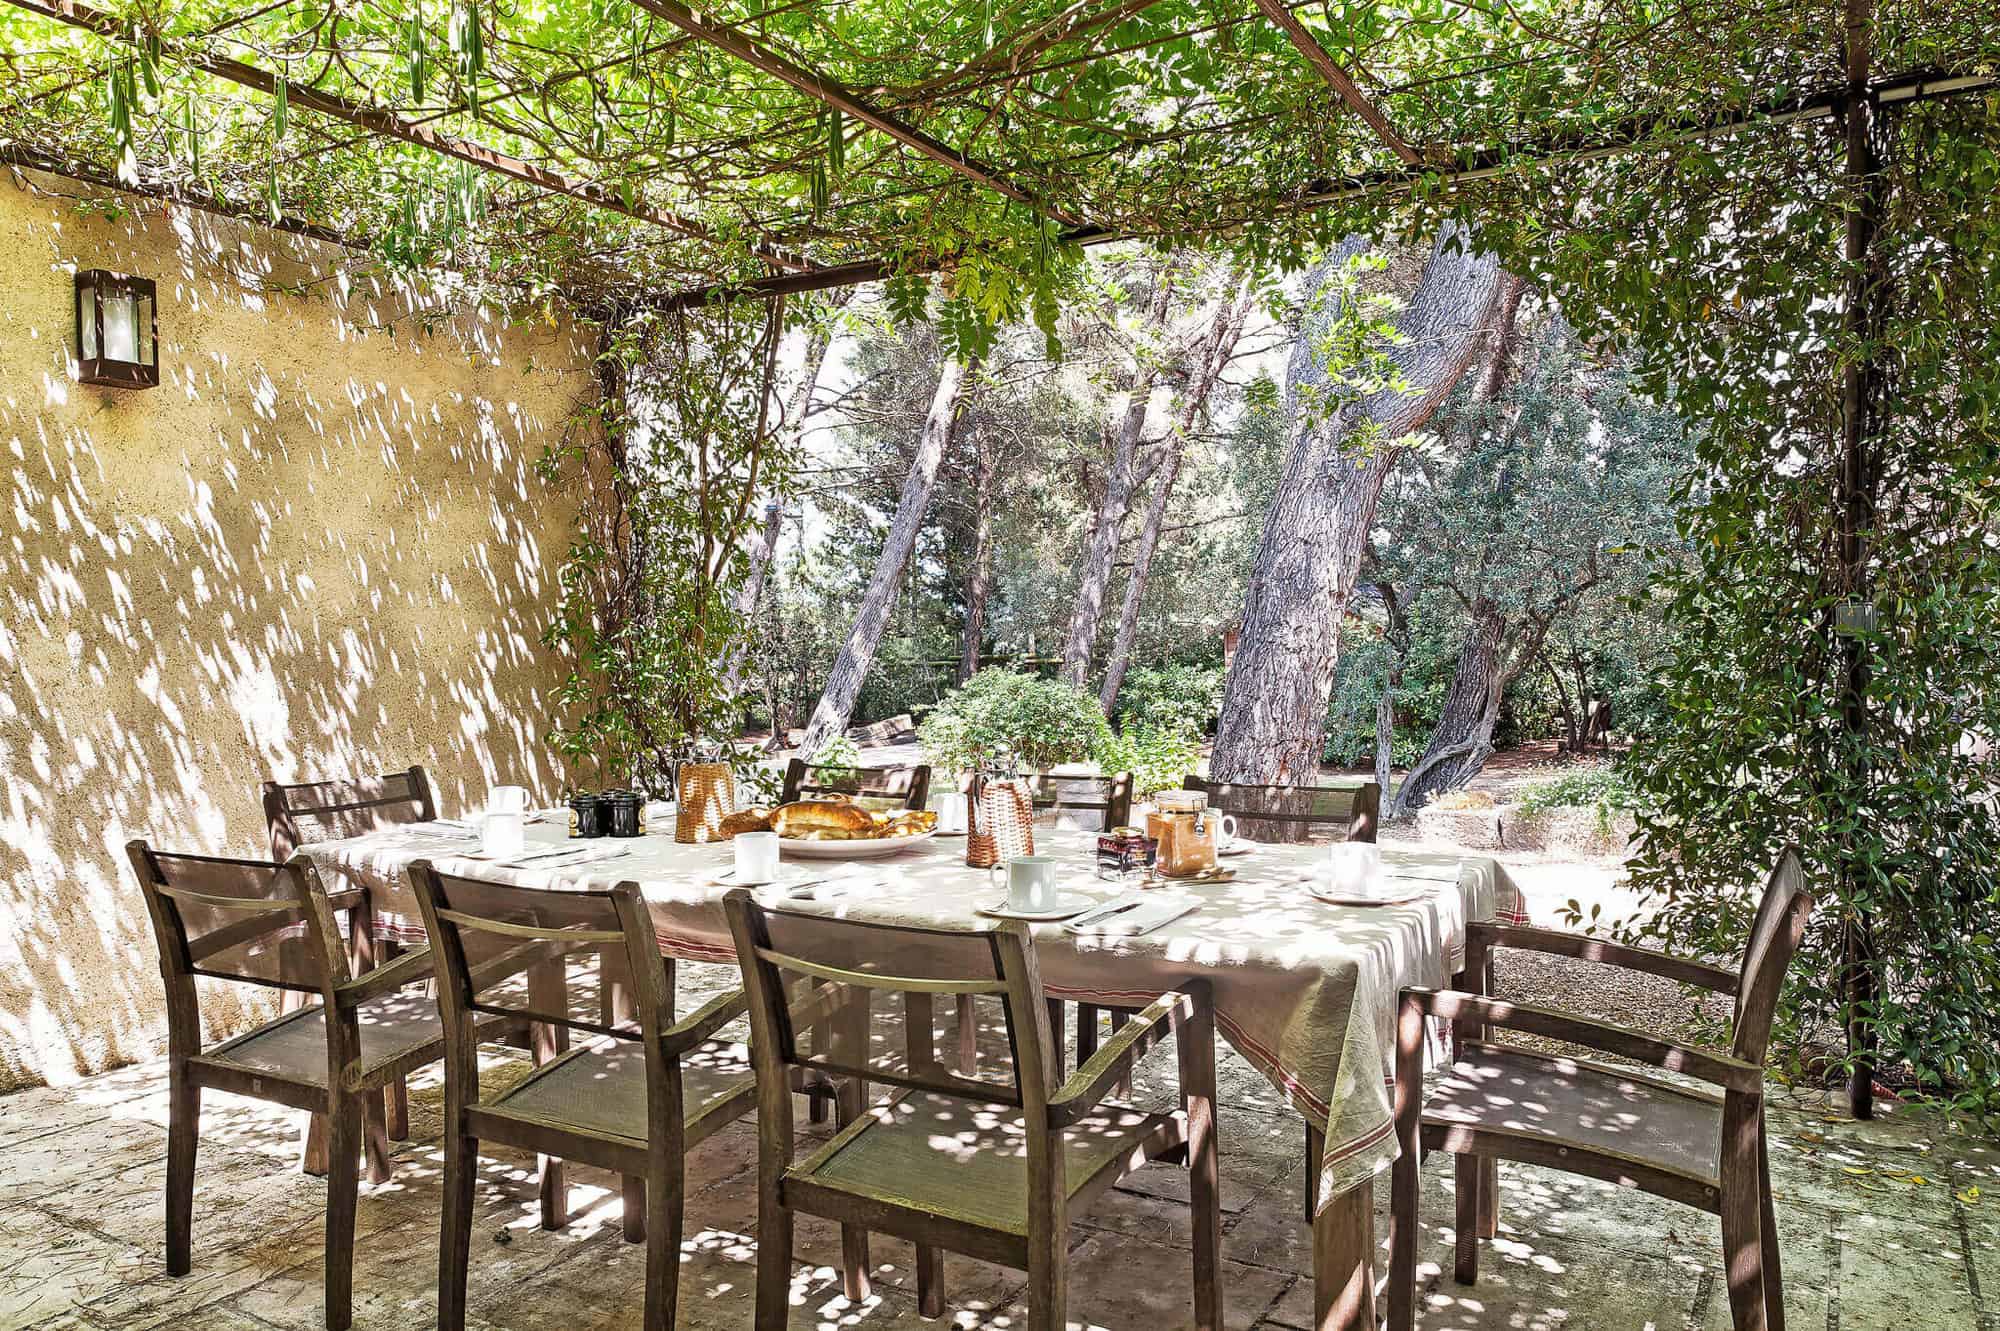 The terrace of St Remy Zen has a table laid out for lunch with a canopy of plants and ivy giving shade,